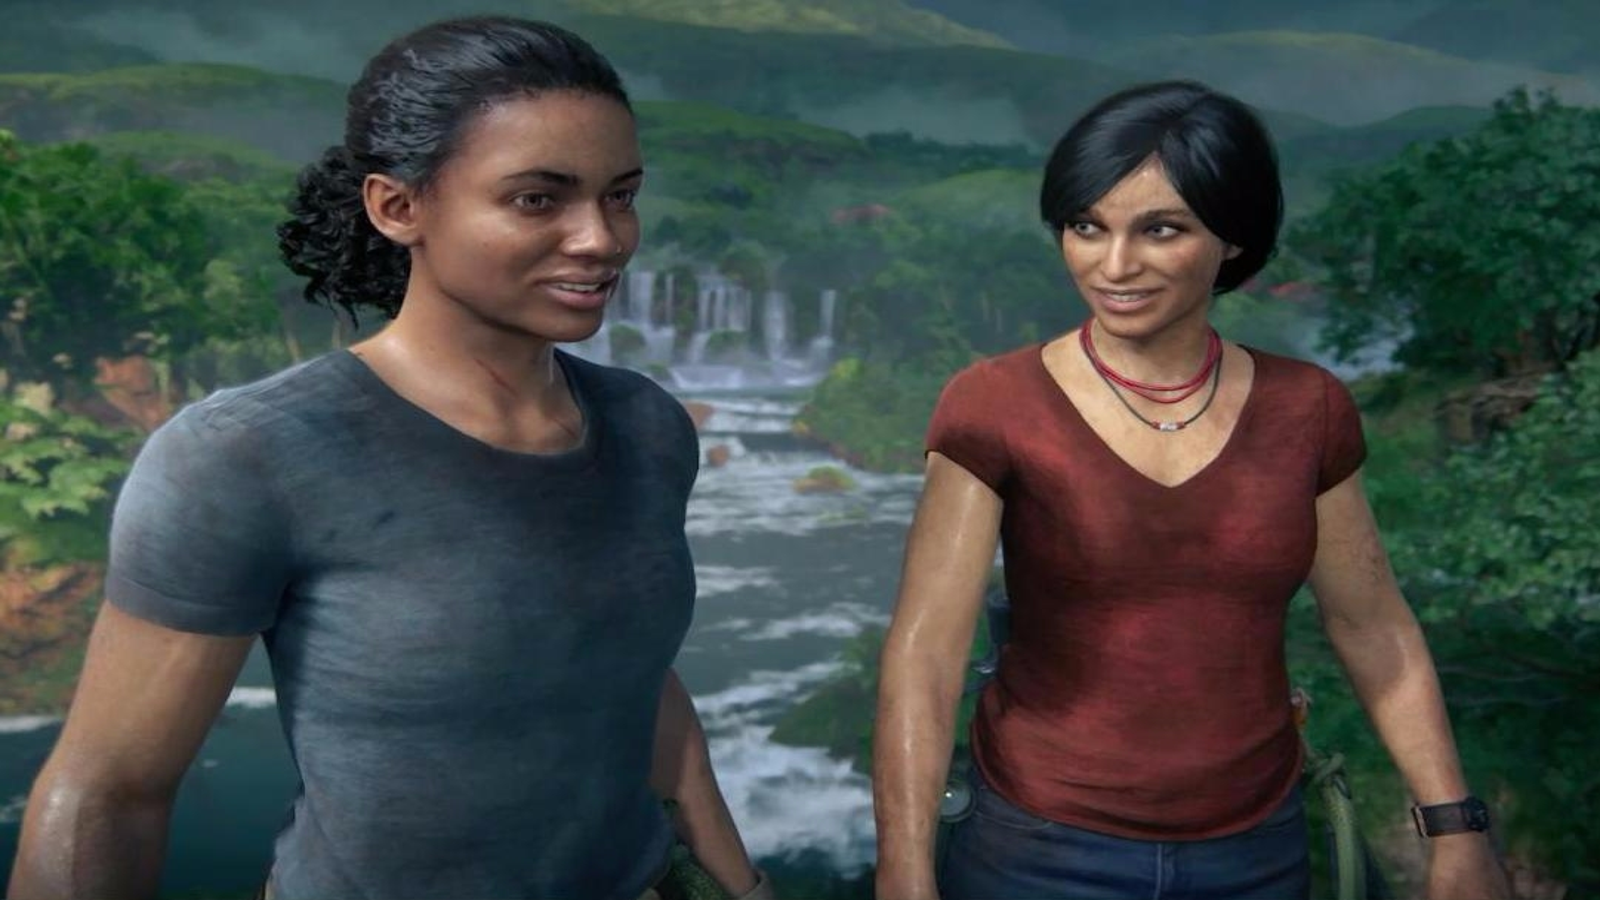 Uncharted: Legacy of Thieves Walkthrough - Uncharted: Legacy of